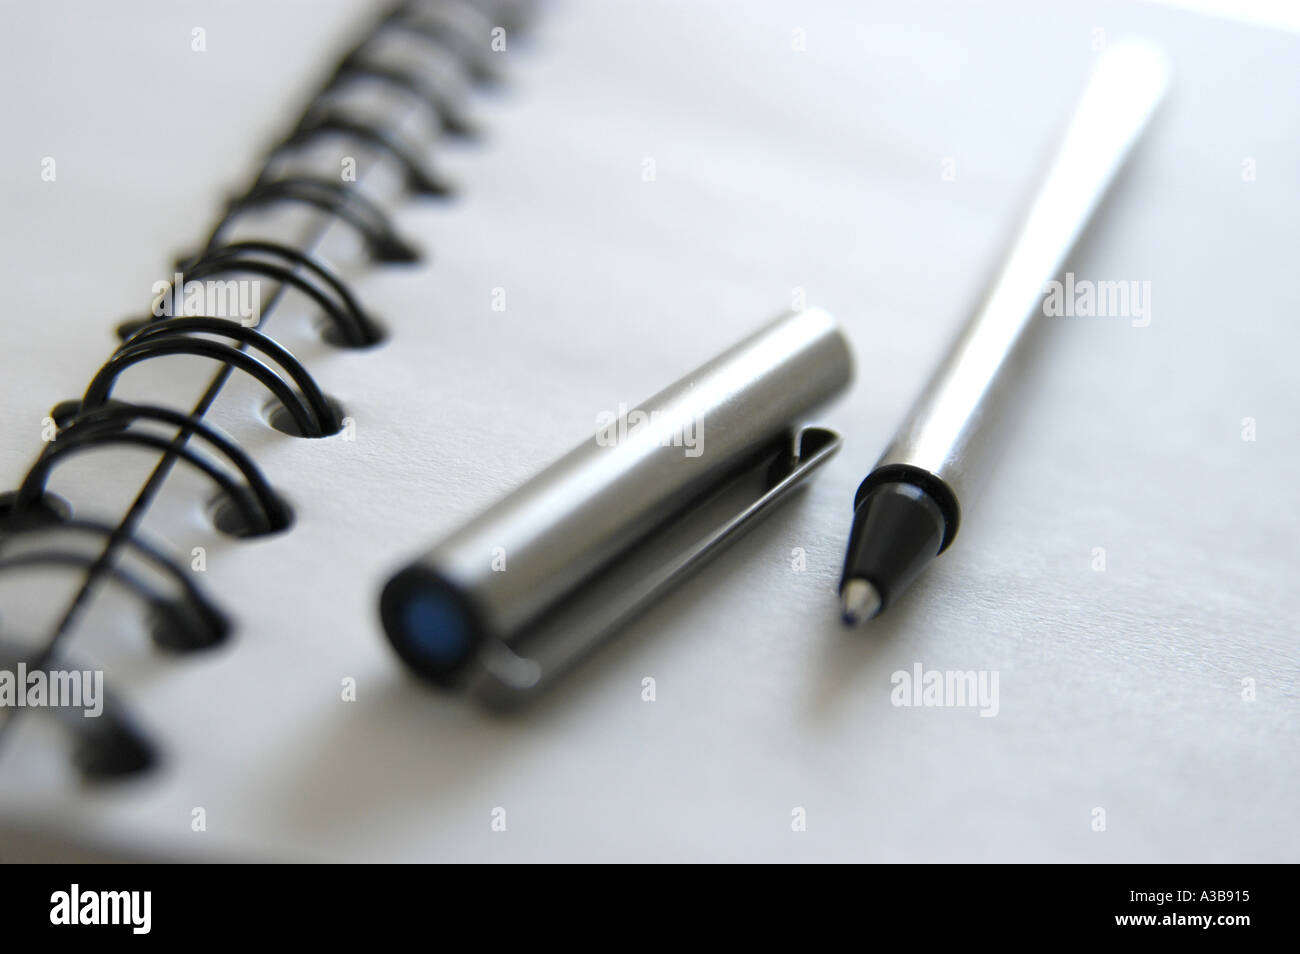 White note book with black spiral binding and stainless steel pen with cap removed. Shot with shallow depth-of-field. Stock Photo